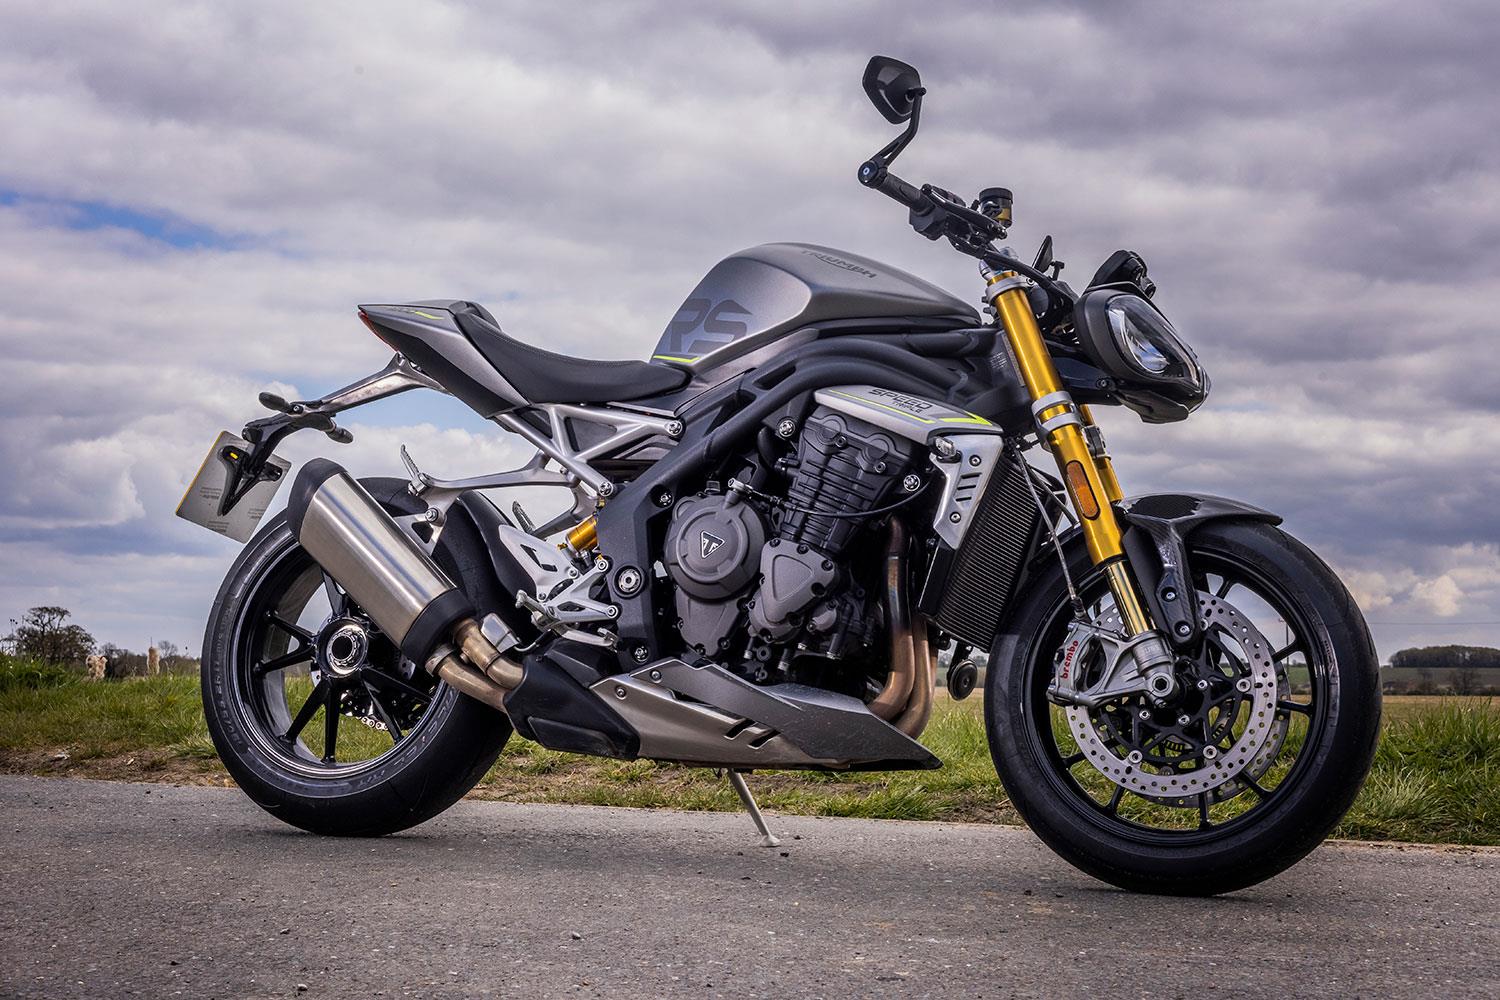 Triumph Speed 400 Review: Coming of age - Auto Reviews News